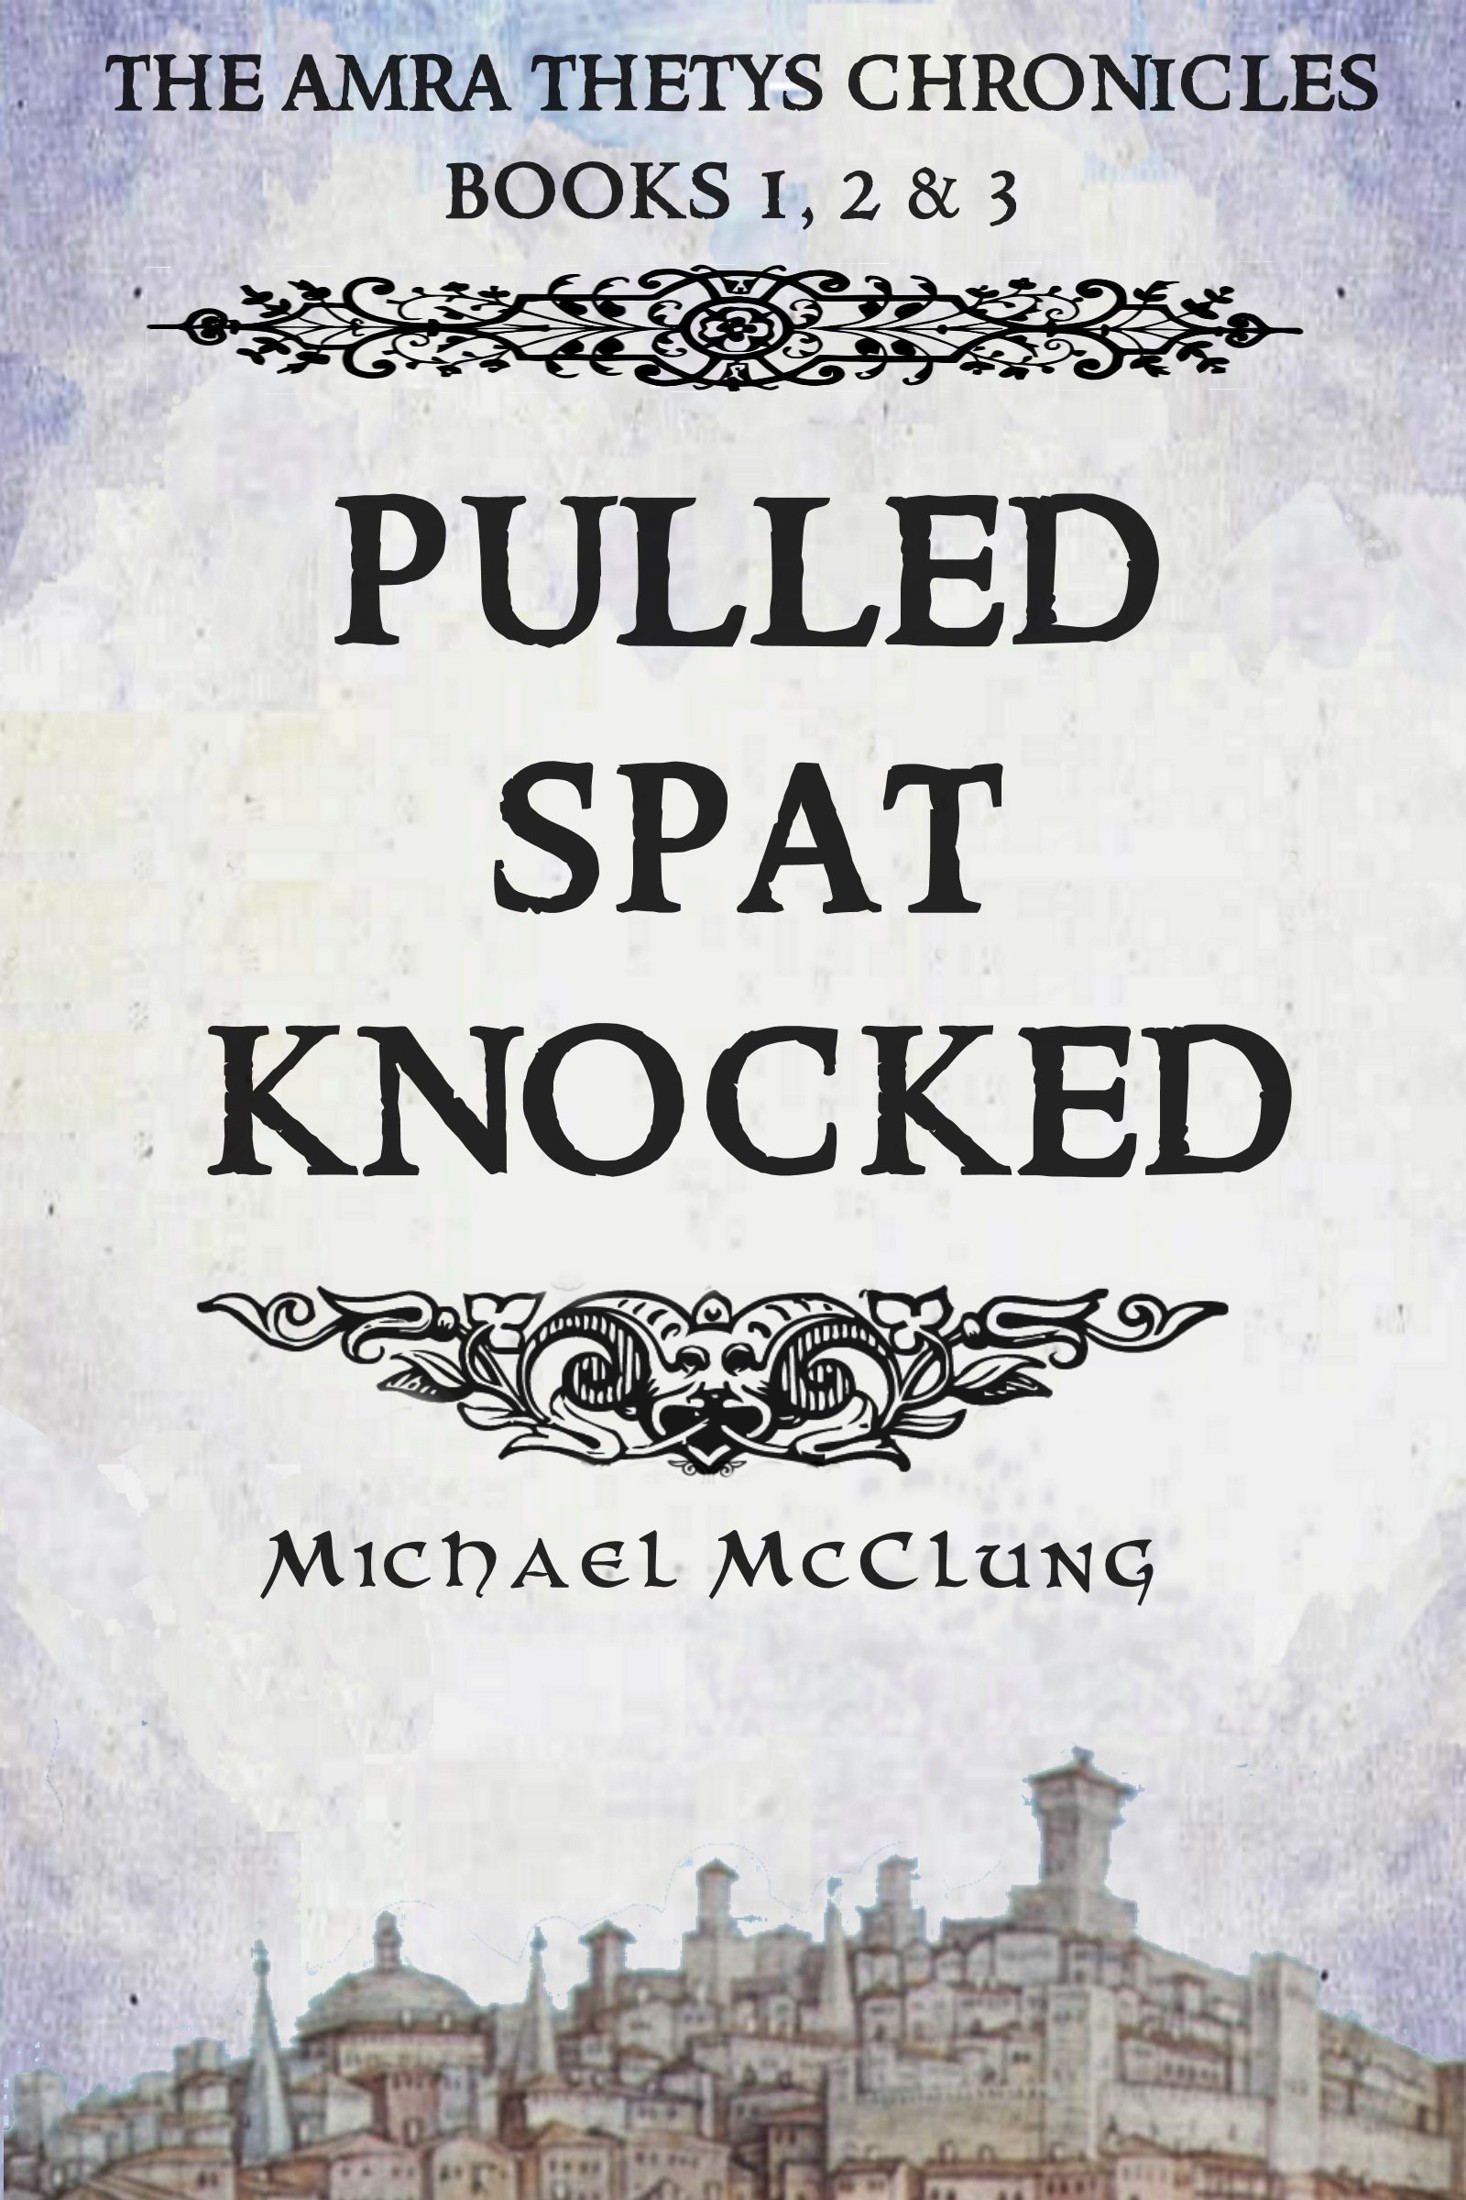 Pulled Spat Knocked: The Amra Thetys Chronicles, Books 1, 2 & 3